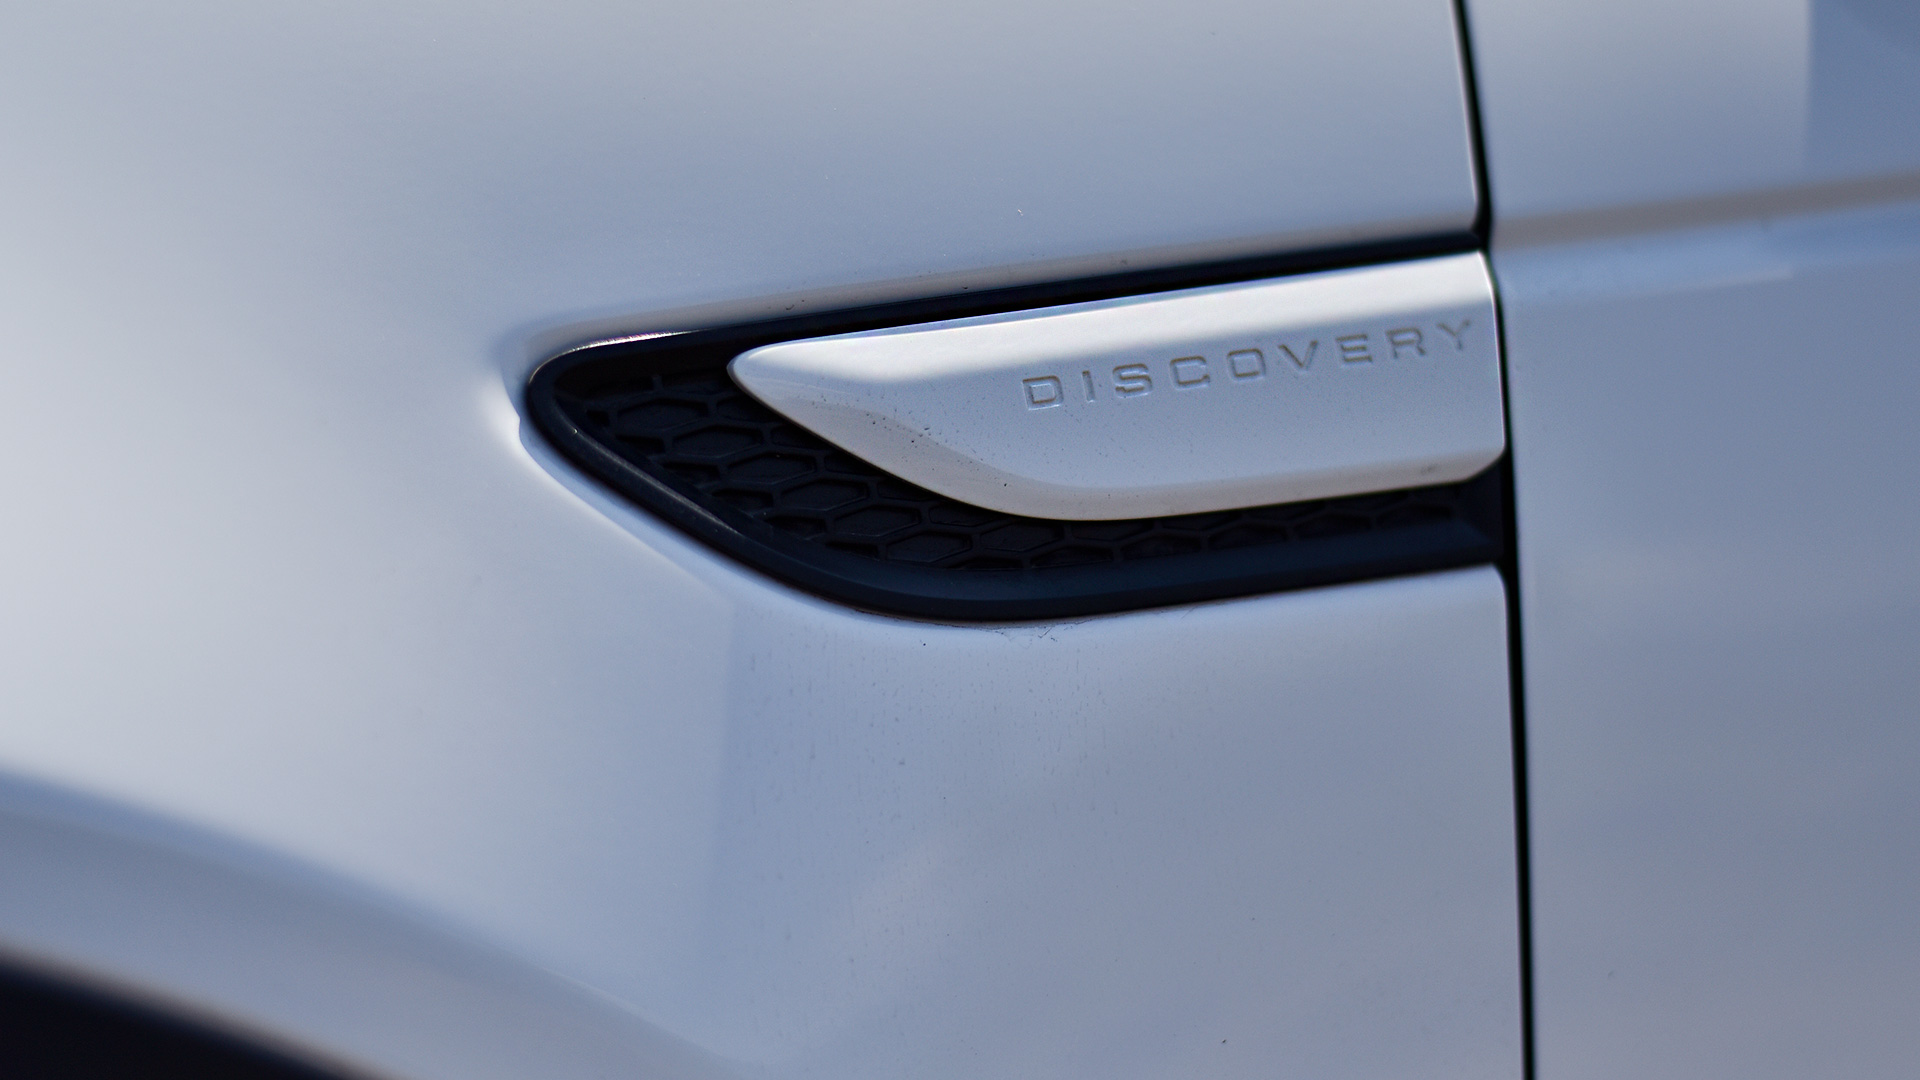 Land Rover Discovery Sport 2020 S Exterior